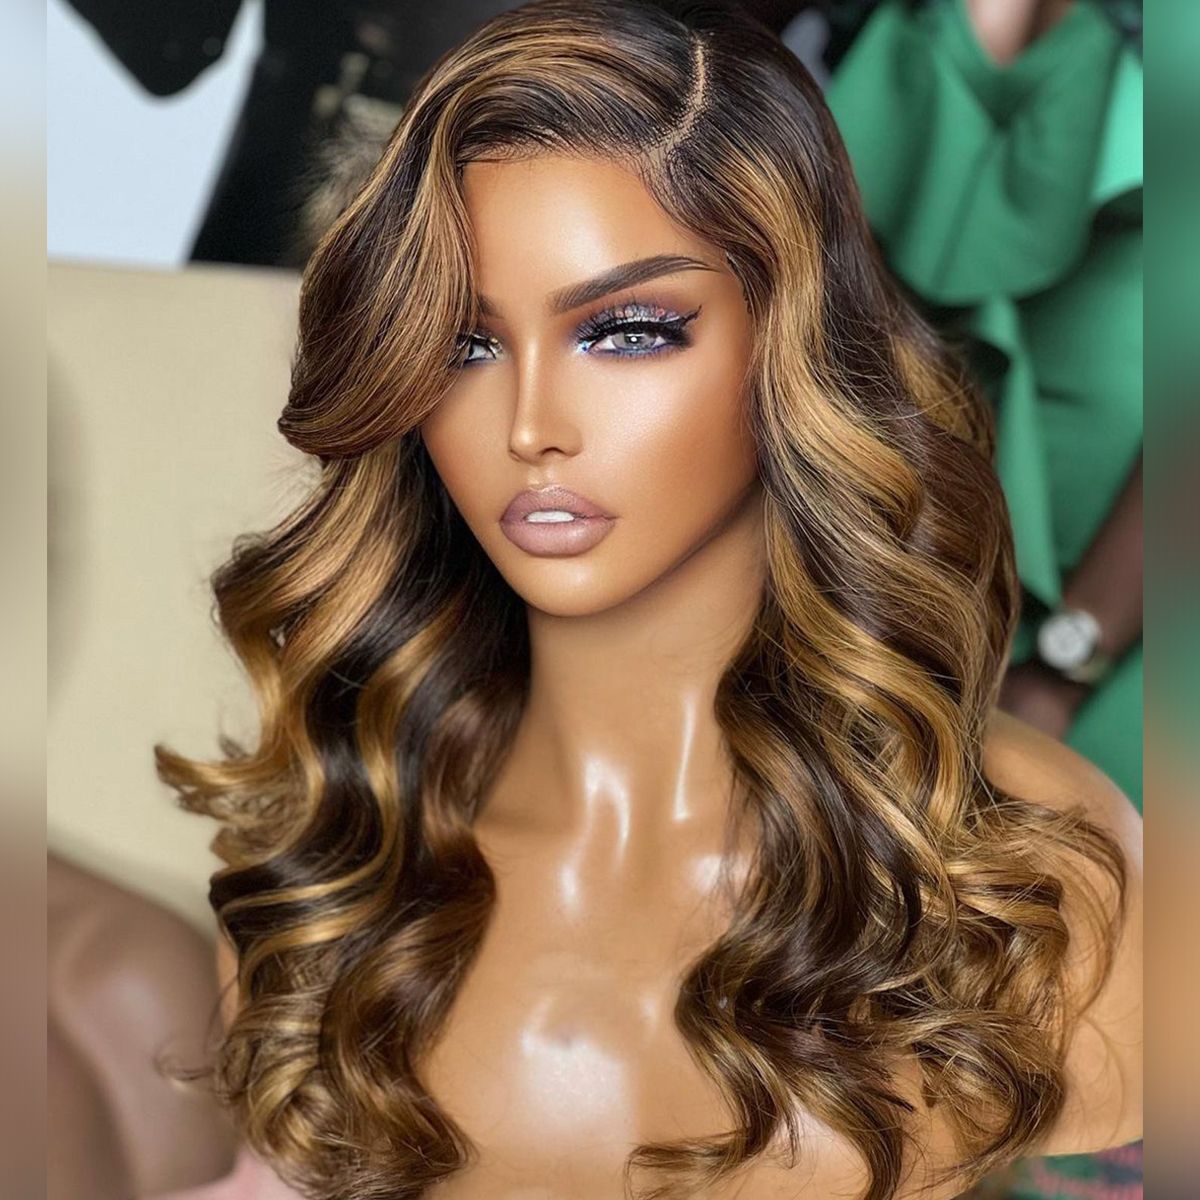 XBL Hair Honey Blonde 4/27 Highlight Wig 13x4 Lace Front Wig Body Wave Human Hair Lace Wigs